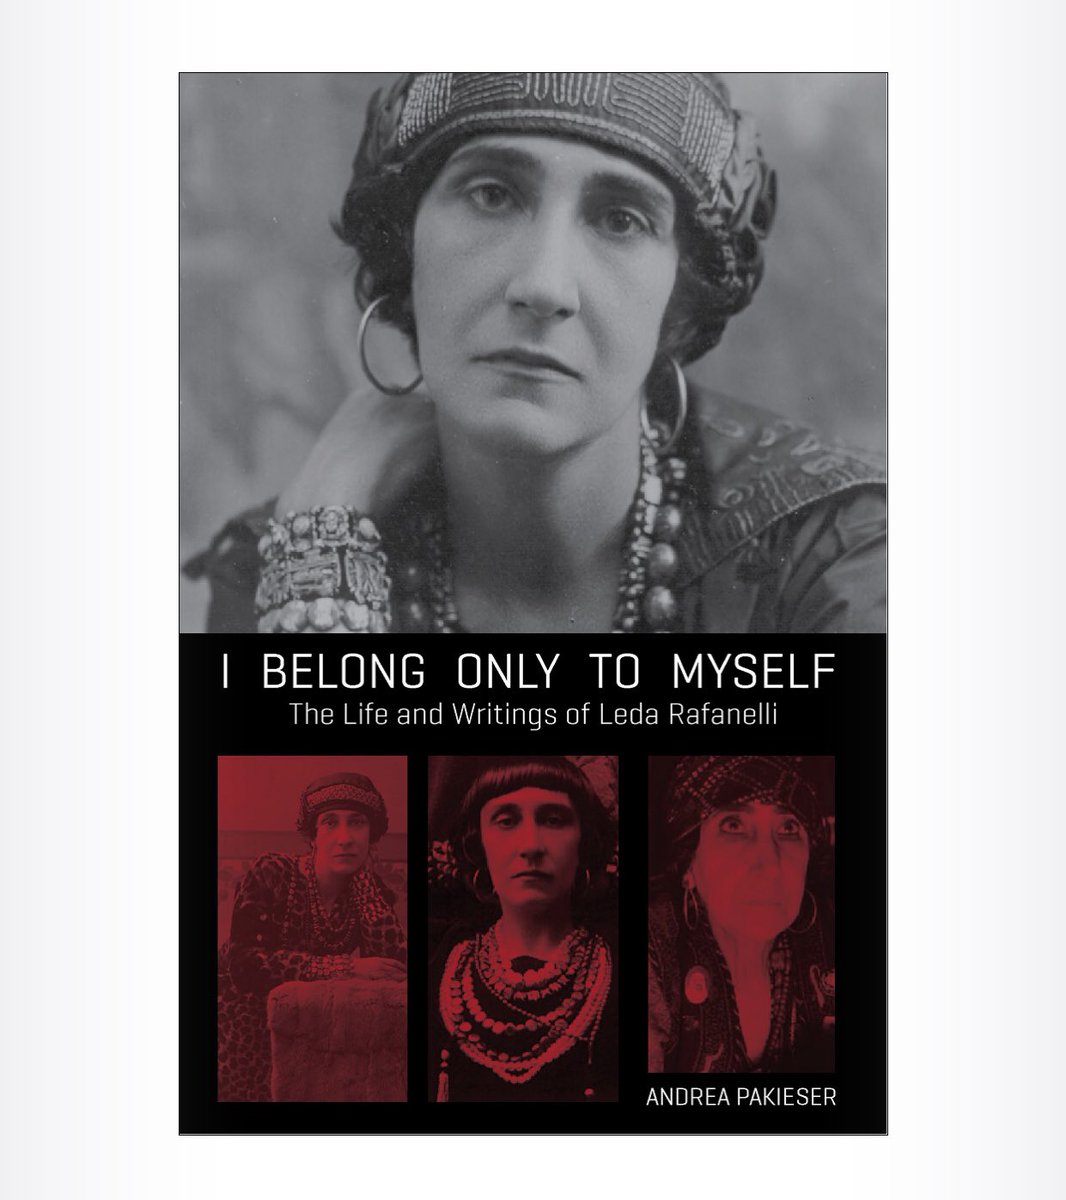 Via this book, I am intellectually living and wrestling with Leda Rafanelli - an Italian anarchist and Muslim who coined the term “feminility.” It is for a new book I’m working on about anarchist feminists  https://www.patreon.com/posts/40846842 